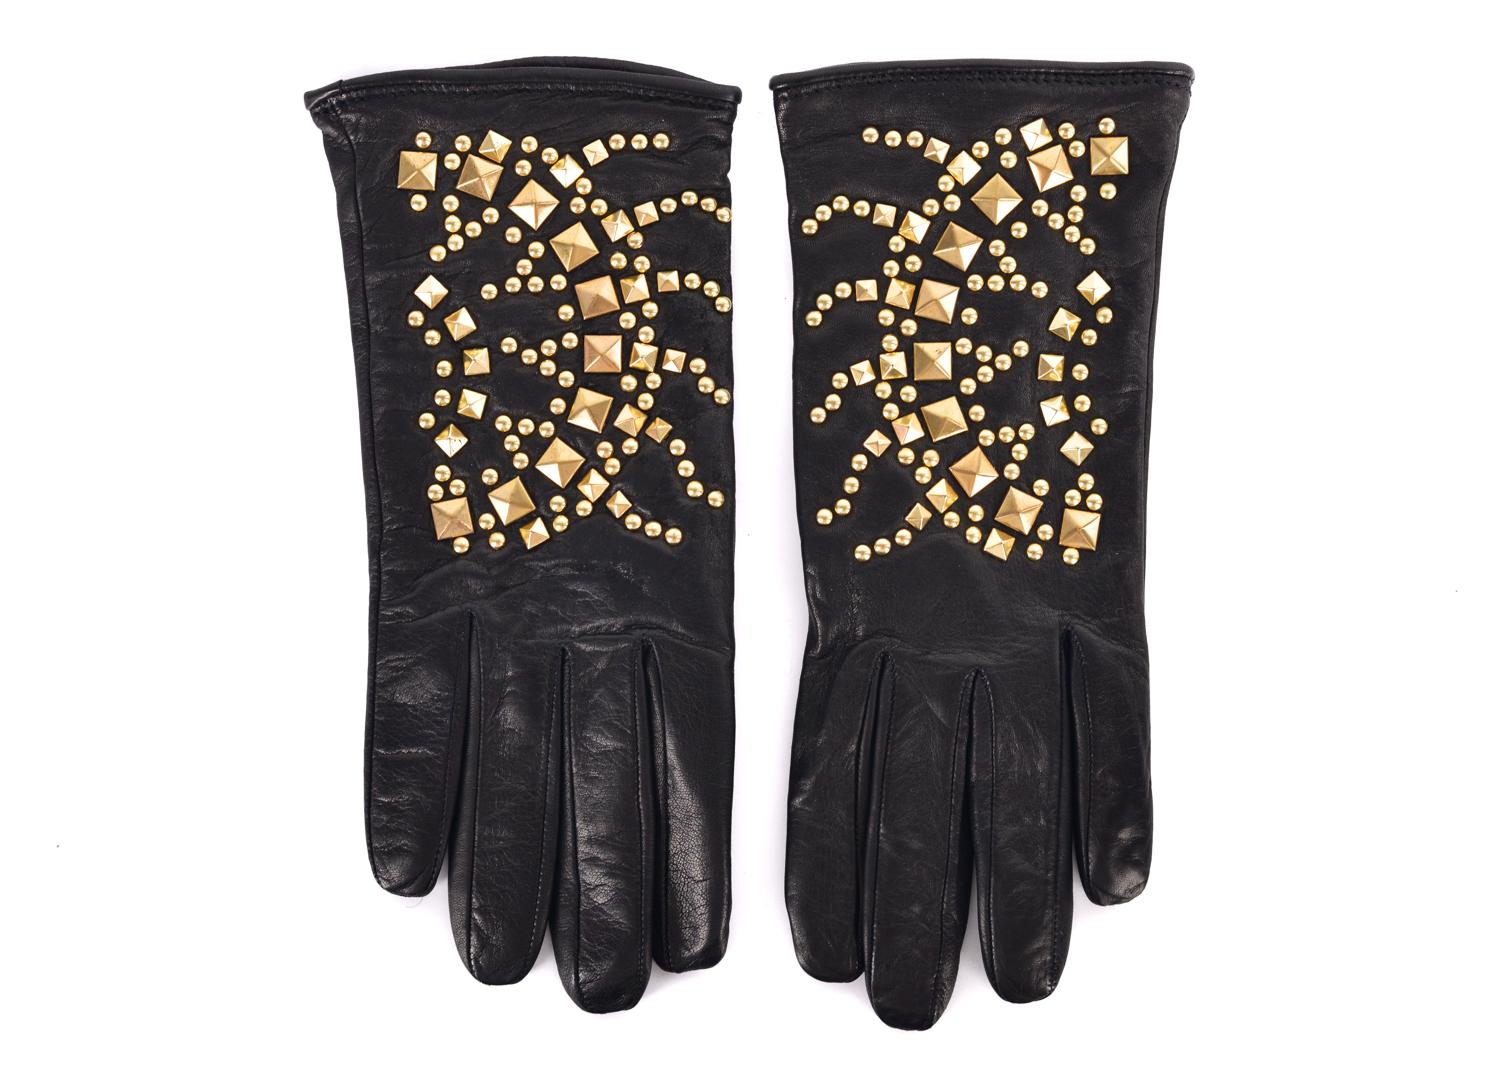 Cavalli reintroduces the heat into your winter with these Gold Studded Gloves. This pair features high quality luxe leather, a rich wool interior lining, and delicately polished gold toned cones and studs. You can pair these gloves with the perfect